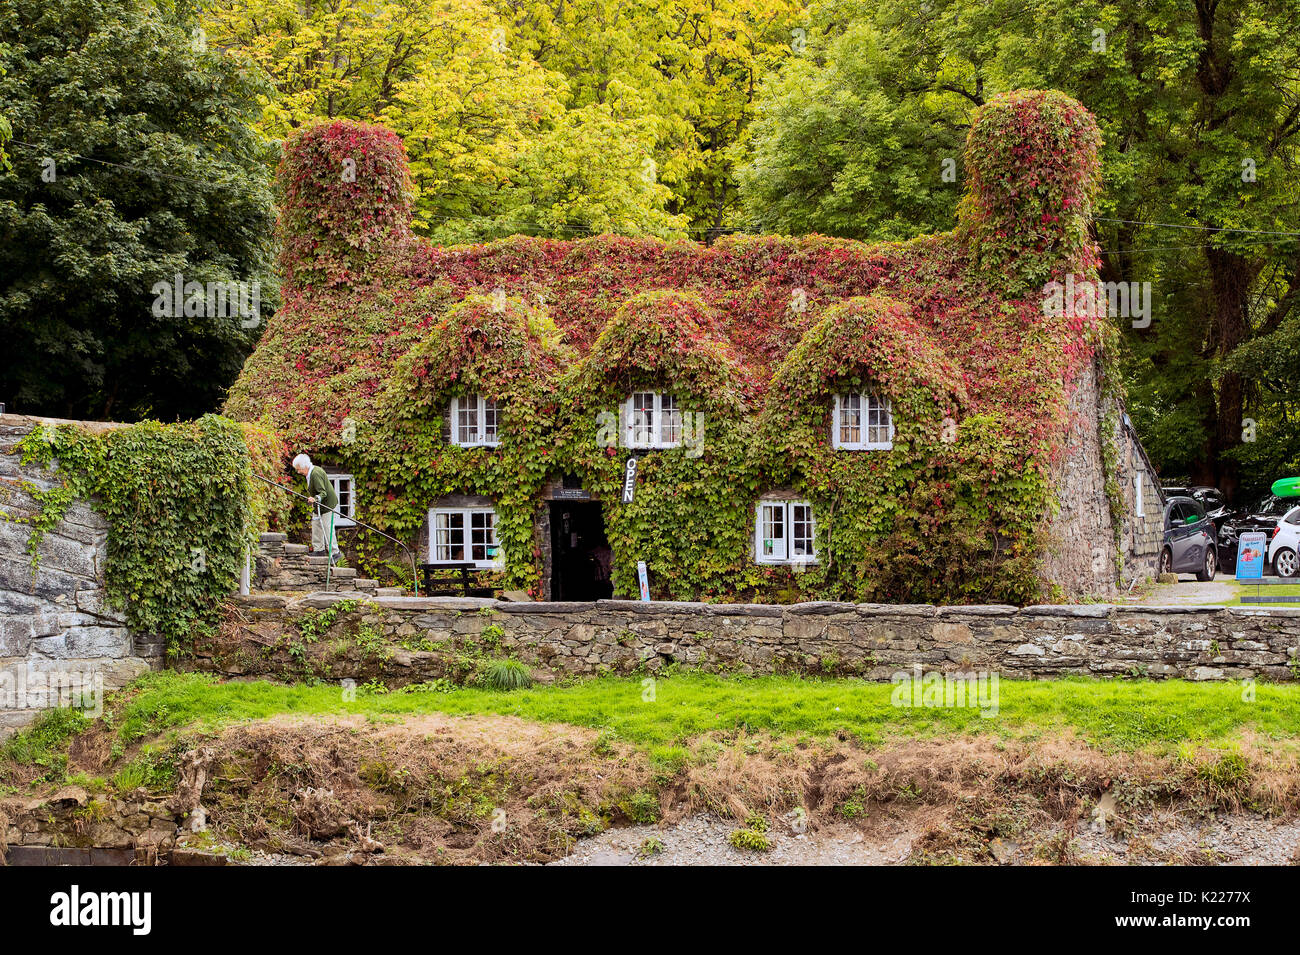 The Virginia creeper covering the Tu Hwnt l'r Bont Tearoom on the banks of the River Conwy in Llanrwst, north Wales, begins to change colour as autumn approaches. Stock Photo